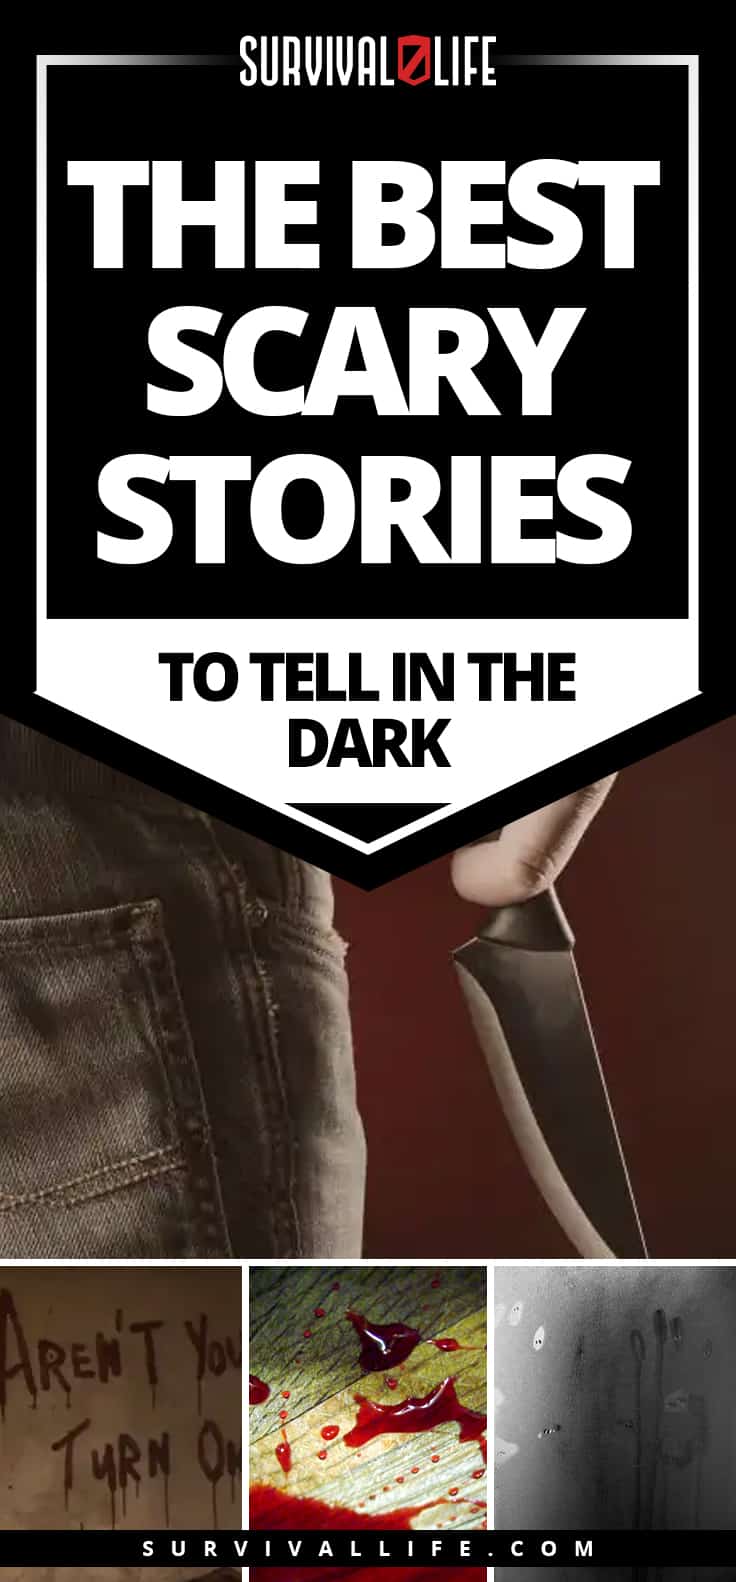 The Best Scary Stories to Tell in the Dark